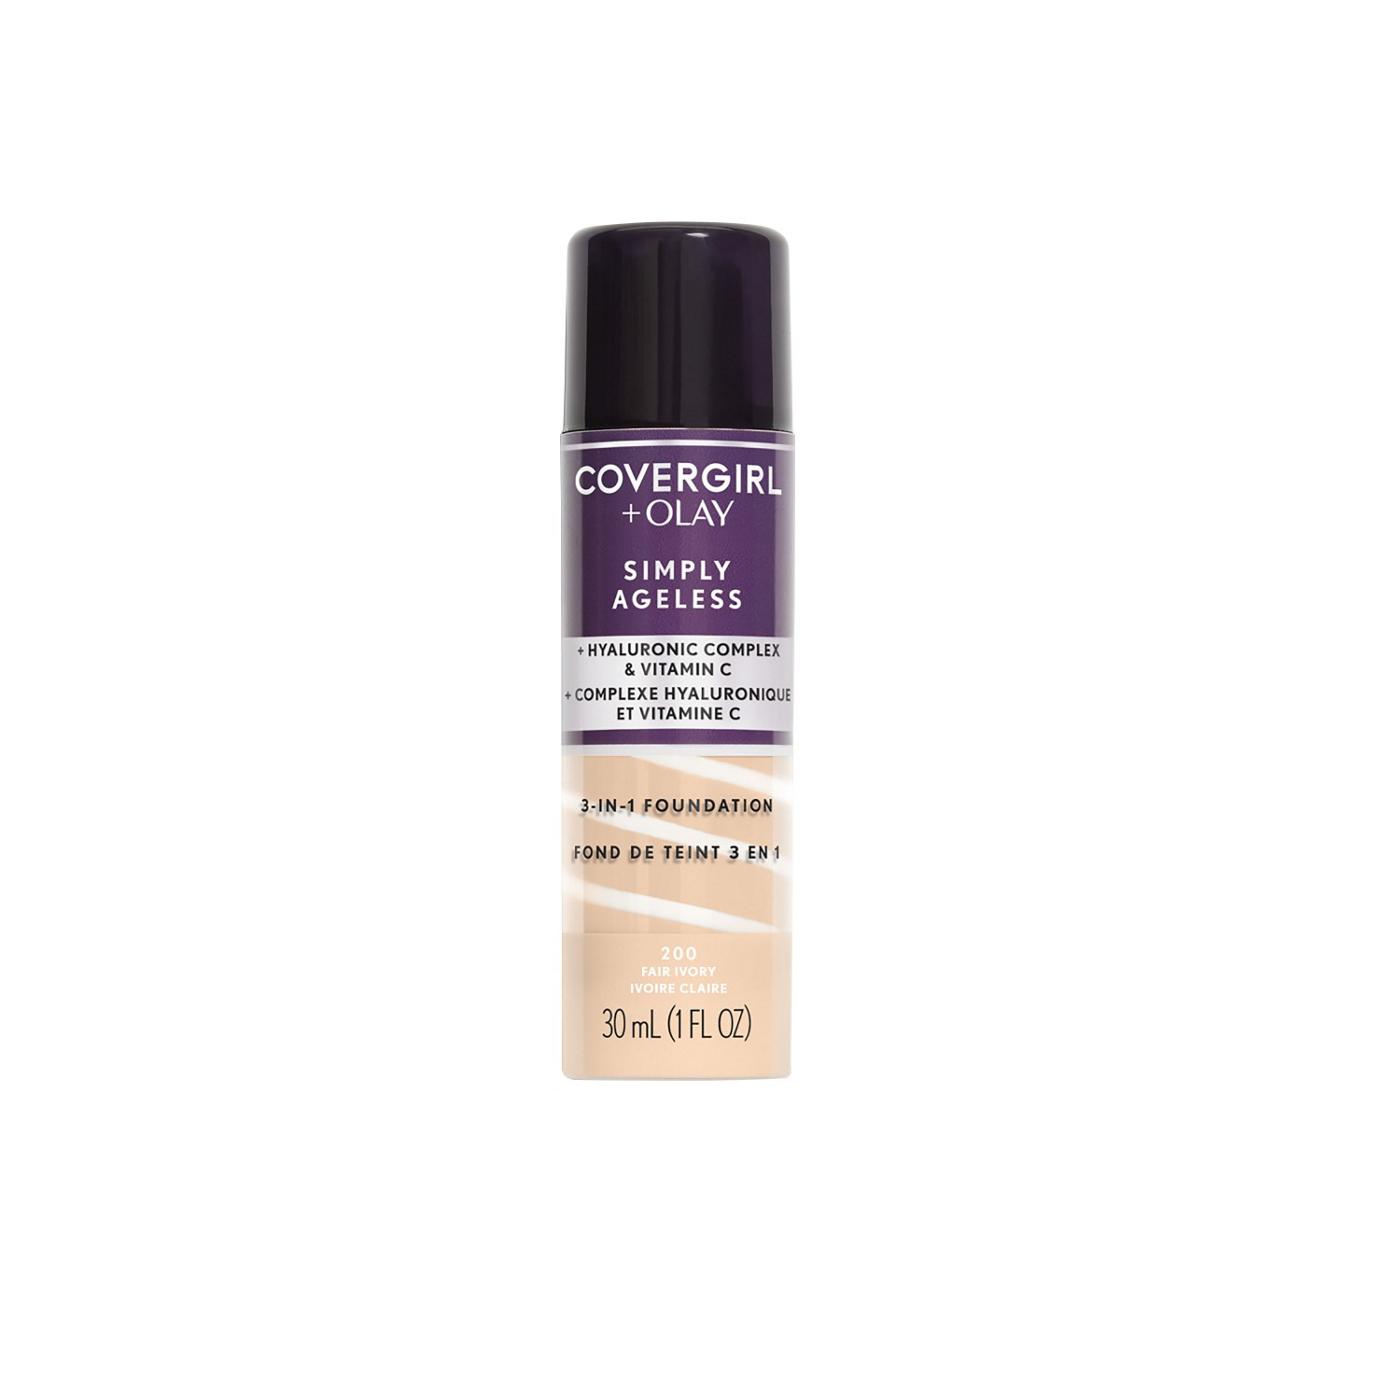 Covergirl Simply Ageless 3-in-1 Liquid Foundation 200 Fair Ivory; image 1 of 5